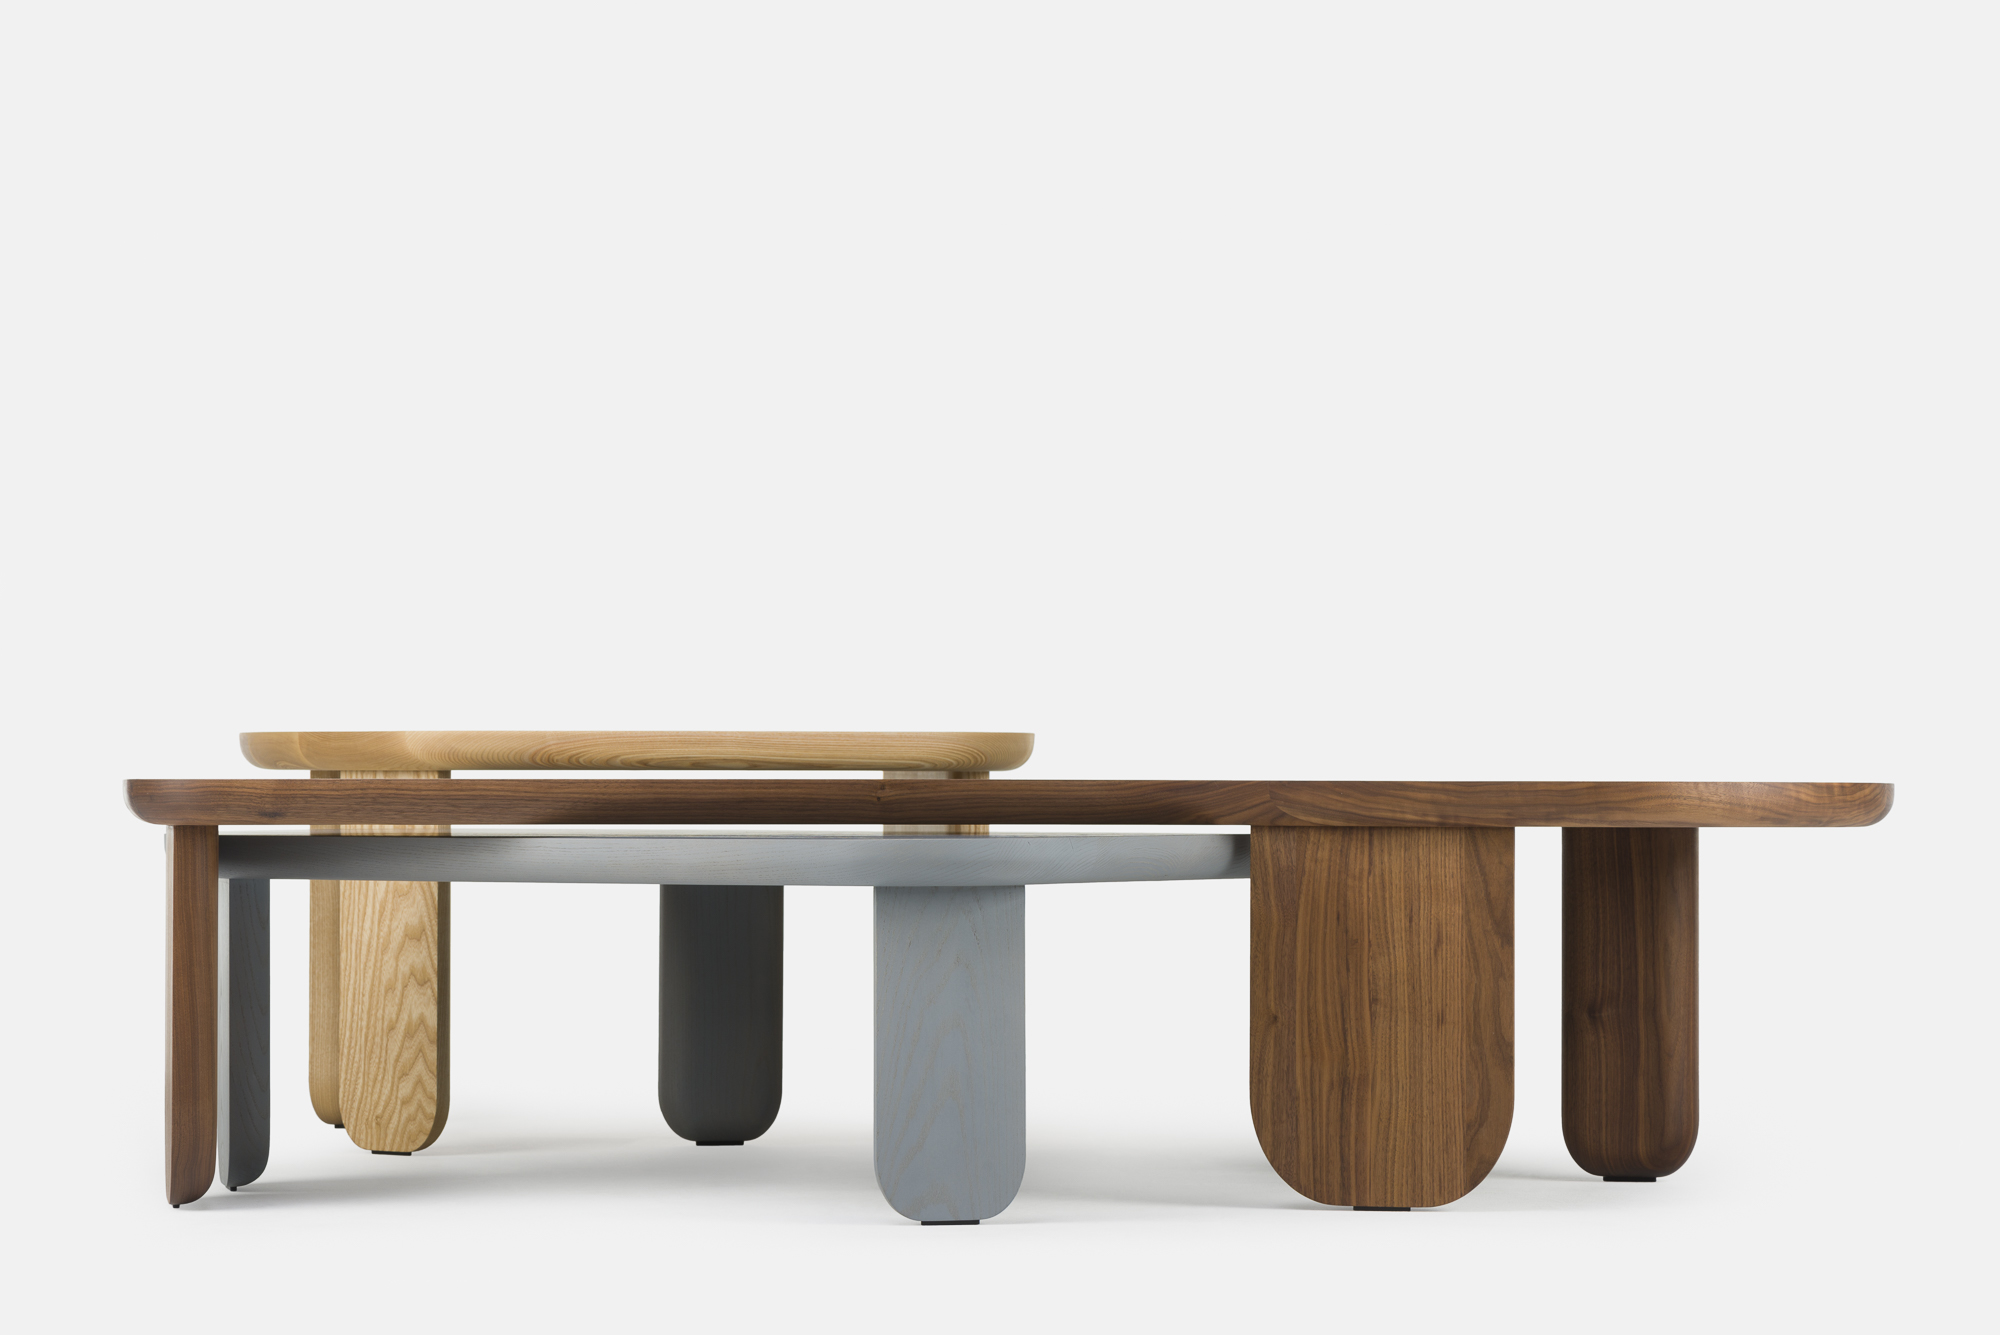 Kim occasional tables by Nichetto